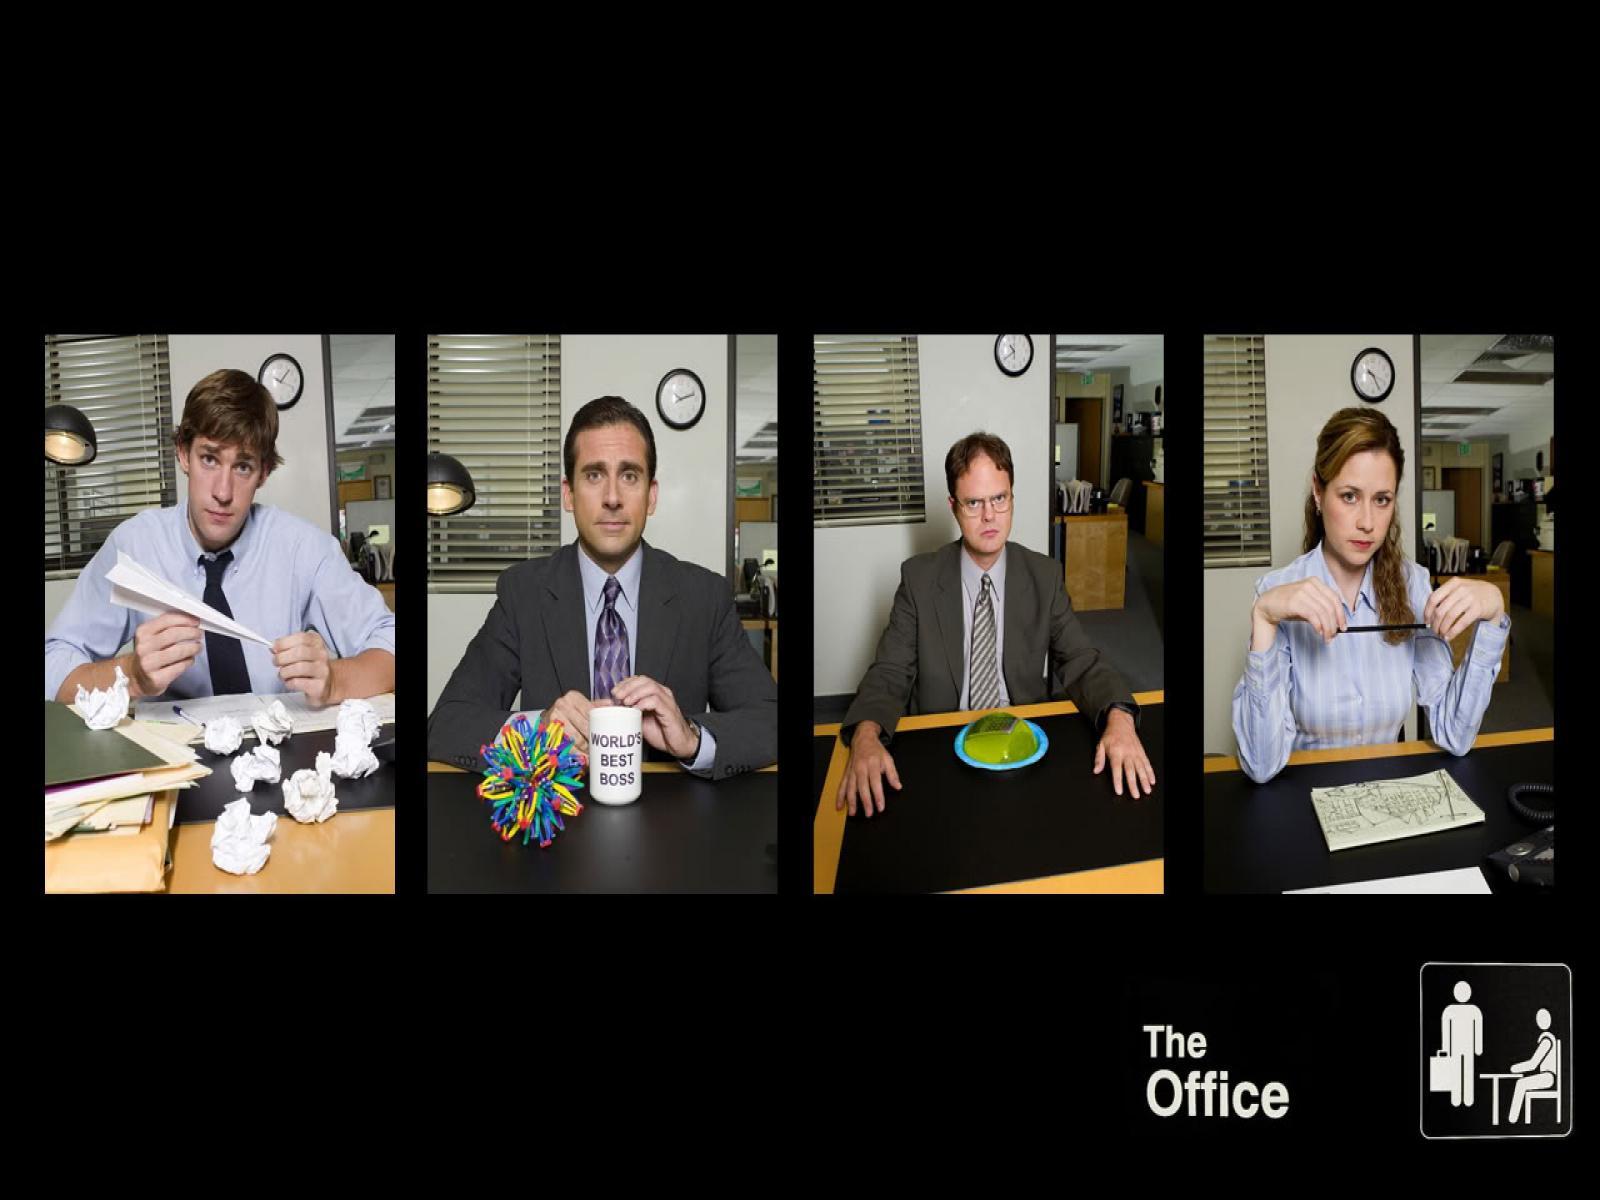 7Q474T2 The Office Wallpapers 1280x800 px